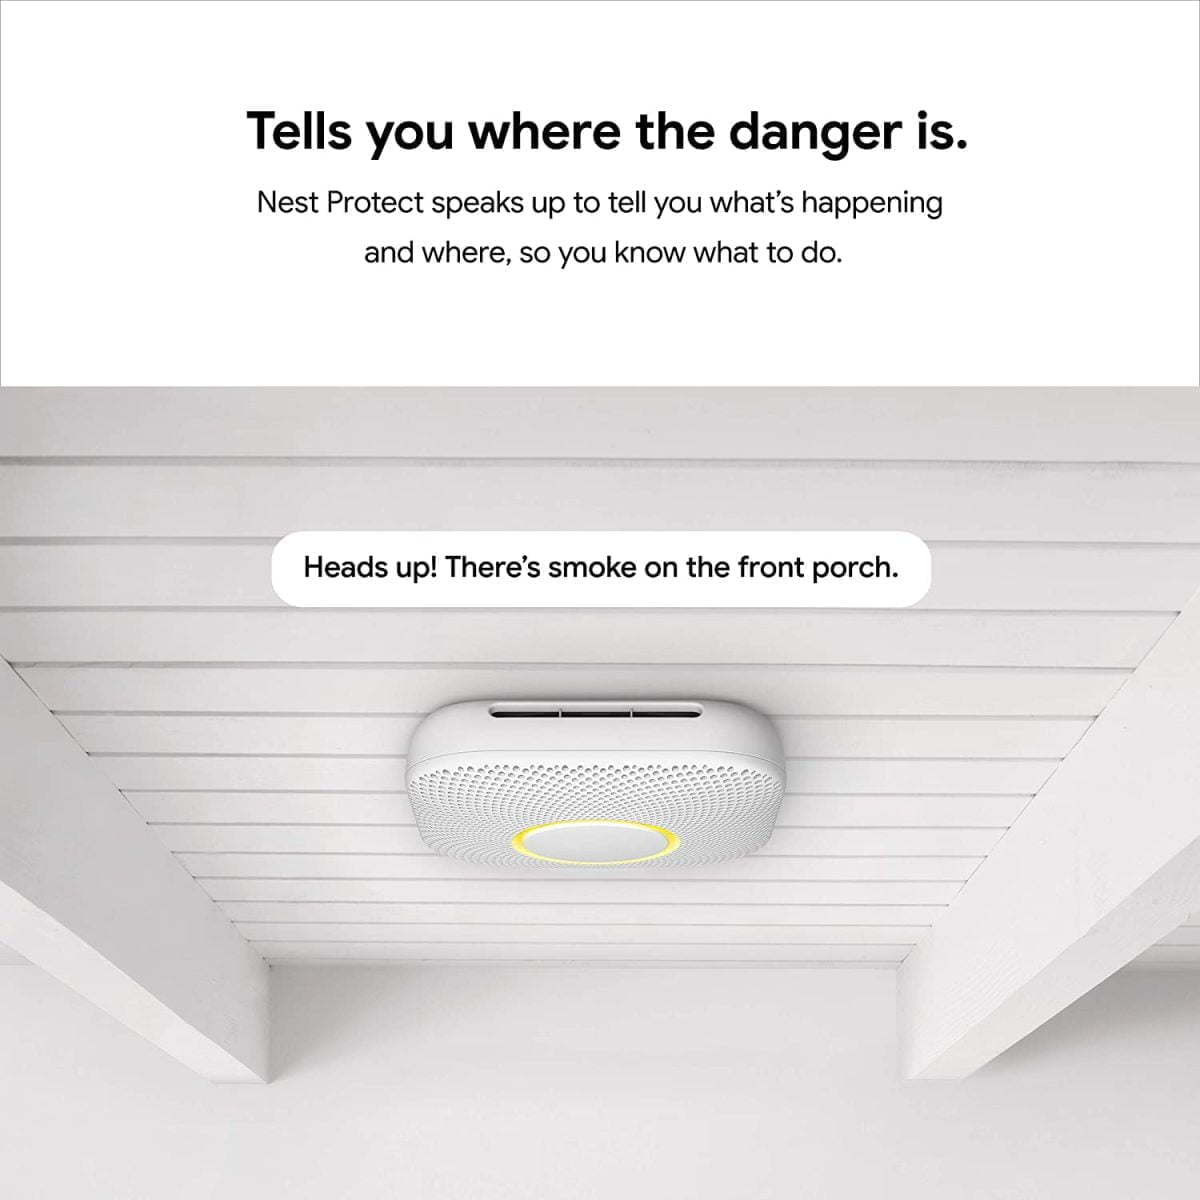 81017Mpme8L. Ac Sl1500 Google &Lt;H1&Gt;Google Nest Protect - Smoke Alarm - Smoke Detector And Carbon Monoxide Detector - Battery Operated , White - S3000Bwes&Lt;/H1&Gt; &Lt;Ul Class=&Quot;A-Unordered-List A-Vertical A-Spacing-Mini&Quot;&Gt; &Lt;Li&Gt;&Lt;Span Class=&Quot;A-List-Item&Quot;&Gt; Smoke Detector And Carbon Monoxide Detector That Speaks Up In A Friendly Voice To Give You An Early Warning When There'S Smoke Or Co In Your Home &Lt;/Span&Gt;&Lt;/Li&Gt; &Lt;Li&Gt;&Lt;Span Class=&Quot;A-List-Item&Quot;&Gt; Split Spectrum Sensor Looks For Both Fast Burning And Smoldering, And Tells You Where The Danger Is &Lt;/Span&Gt;&Lt;/Li&Gt; &Lt;Li&Gt;&Lt;Span Class=&Quot;A-List-Item&Quot;&Gt; Get Phone Alerts So You Know Something'S Wrong Even When You'Re Away From Home&Lt;/Span&Gt;&Lt;/Li&Gt; &Lt;Li&Gt;&Lt;Span Class=&Quot;A-List-Item&Quot;&Gt; Co Detector Looks Out For Carbon Monoxide And Tells You Where It'S Located &Lt;/Span&Gt;&Lt;/Li&Gt; &Lt;Li&Gt;&Lt;Span Class=&Quot;A-List-Item&Quot;&Gt; With App Silence You Can Silence The Smoke Alarm With Your Phone In The Nest App When There'S Only A Little Smoke &Lt;/Span&Gt;&Lt;/Li&Gt; &Lt;Li&Gt;&Lt;Span Class=&Quot;A-List-Item&Quot;&Gt; No Chirps To Tell You The Battery Is Low; Nest Protect Tests Its Own Batteries And Gives You A Nightly Promise When You Turn Off The Lights So You Know Everything Is Working &Lt;/Span&Gt;&Lt;/Li&Gt; &Lt;Li&Gt;&Lt;Span Class=&Quot;A-List-Item&Quot;&Gt; A Light In The Dark: Usually Nest Protect Has Its Light Turned Off But When You Walk Underneath It Pathlight Can Light Your Way. &Lt;/Span&Gt;&Lt;/Li&Gt; &Lt;/Ul&Gt; &Lt;Div Class=&Quot;A-Row A-Expander-Container A-Expander-Inline-Container&Quot;&Gt; &Lt;Div Class=&Quot;A-Expander-Content A-Expander-Extend-Content A-Expander-Content-Expanded&Quot;&Gt; &Lt;Ul Class=&Quot;A-Unordered-List A-Vertical A-Spacing-None&Quot;&Gt; &Lt;Li&Gt;&Lt;Span Class=&Quot;A-List-Item&Quot;&Gt;The Nest Smoke And Carbon Monoxide Alarm Has Sensors With A 10-Year Lifespan To Help Keep Your Family Safe For Up To A Decade&Lt;/Span&Gt;&Lt;/Li&Gt; &Lt;Li&Gt;&Lt;Span Class=&Quot;A-List-Item&Quot;&Gt;With Safety Check You Can Test All Your Smoke And Co Alarms With Just A Tap And Get A Full Report Once The Test Is Done&Lt;/Span&Gt;&Lt;/Li&Gt; &Lt;Li&Gt;&Lt;Span Class=&Quot;A-List-Item&Quot;&Gt;Google Nest Protect (Battery) Packaged With A Google Seal For Online Marketplace&Lt;/Span&Gt;&Lt;/Li&Gt; &Lt;Li&Gt;&Lt;Span Class=&Quot;A-List-Item&Quot;&Gt;Know From Anywhere. Connect Nest Protect To Wi-Fi And It Will Send An Alert To Your Phone If The Alarm Goes Off Or The Batteries Run Low.&Lt;/Span&Gt;&Lt;/Li&Gt; &Lt;Li&Gt;&Lt;Span Class=&Quot;A-List-Item&Quot;&Gt;Tells You What And Where. It Speaks Up To Tell You If There’s Smoke Or Co And Where The Problem Is, So You Know What To Do. Connectivity: Bluetooth 4.0 Le, Wi-Fi 4 (802.11N)&Lt;/Span&Gt;&Lt;/Li&Gt; &Lt;Li&Gt;&Lt;Span Class=&Quot;A-List-Item&Quot;&Gt;App Silence. Nest Protect Is The First Alarm You Can Hush From Your Phone. Simply Walk To The Nest Protect That Noticed The Problem And Open The Nest App.&Lt;/Span&Gt;&Lt;/Li&Gt; &Lt;Li&Gt;&Lt;Span Class=&Quot;A-List-Item&Quot;&Gt;Split-Spectrum Sensor. In An Emergency, Seconds Count. Nest Protect Uses Two Wavelengths Of Light To Look For Both Fast And Slow Burning Fires.&Lt;/Span&Gt;&Lt;/Li&Gt; &Lt;Li&Gt;&Lt;Span Class=&Quot;A-List-Item&Quot;&Gt;Heads-Up. Get A Friendly Voice Alert So You Can Handle Burning Toast Before It Becomes A Burning Toaster.&Lt;/Span&Gt;&Lt;/Li&Gt; &Lt;Li&Gt;&Lt;Span Class=&Quot;A-List-Item&Quot;&Gt;10-Year Carbon Monoxide Sensor. Carbon Monoxide Is Odorless, Invisible And Deadly. When There’s Co, Nest Protect Tells You Where It’s Hiding.&Lt;/Span&Gt;&Lt;/Li&Gt; &Lt;/Ul&Gt; &Lt;/Div&Gt; &Lt;/Div&Gt; Google Nest Google Nest Protect Battery Operated - Smoke Alarm - Smoke Detector And Carbon Monoxide Detector -White - S3000Bwes